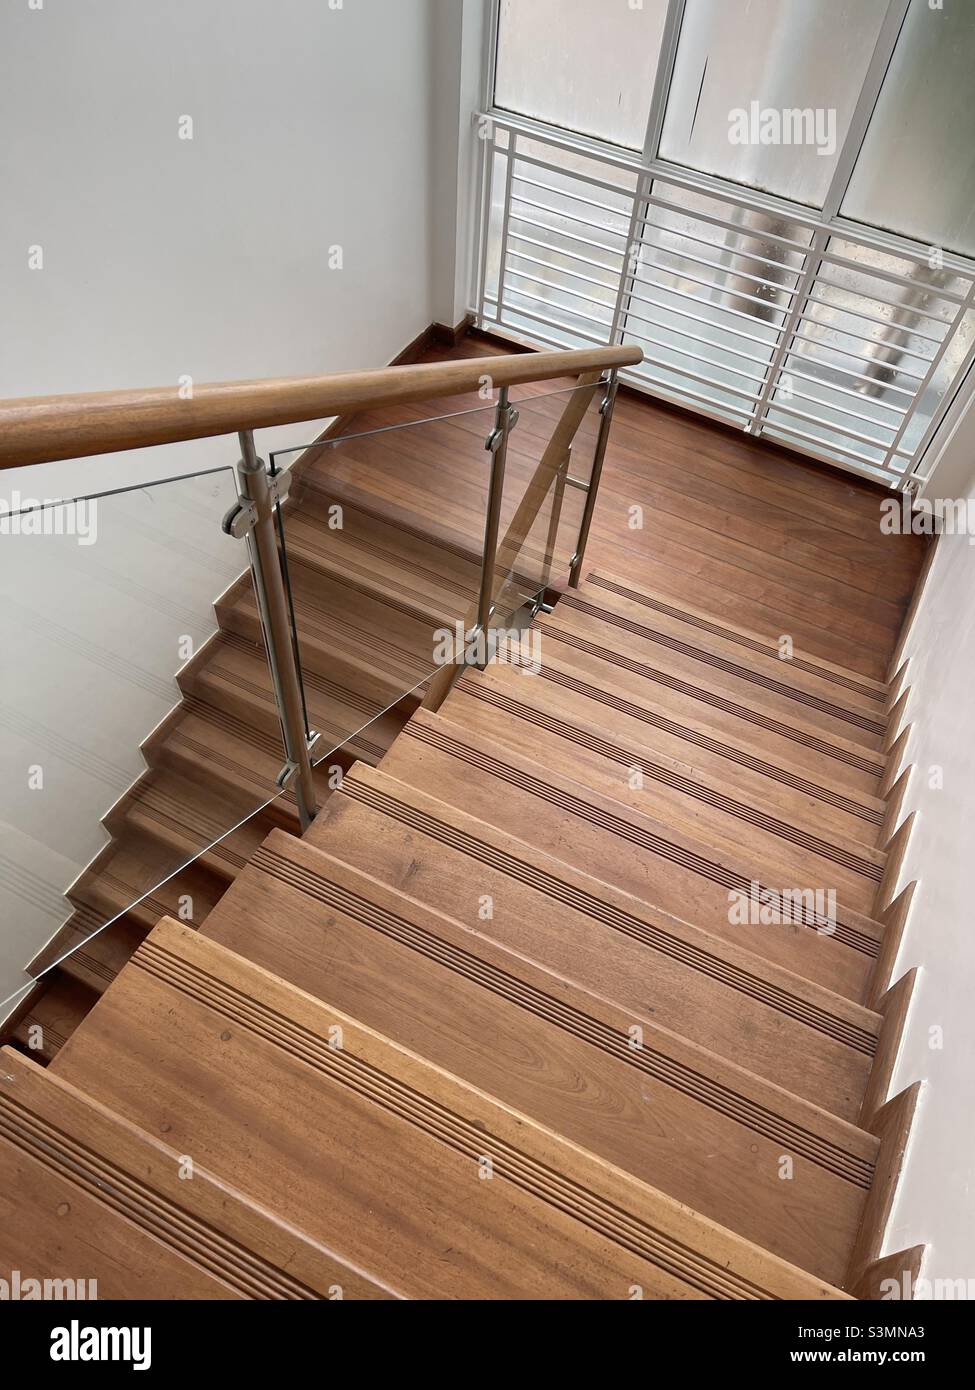 Wooden staircase against white walls Stock Photo